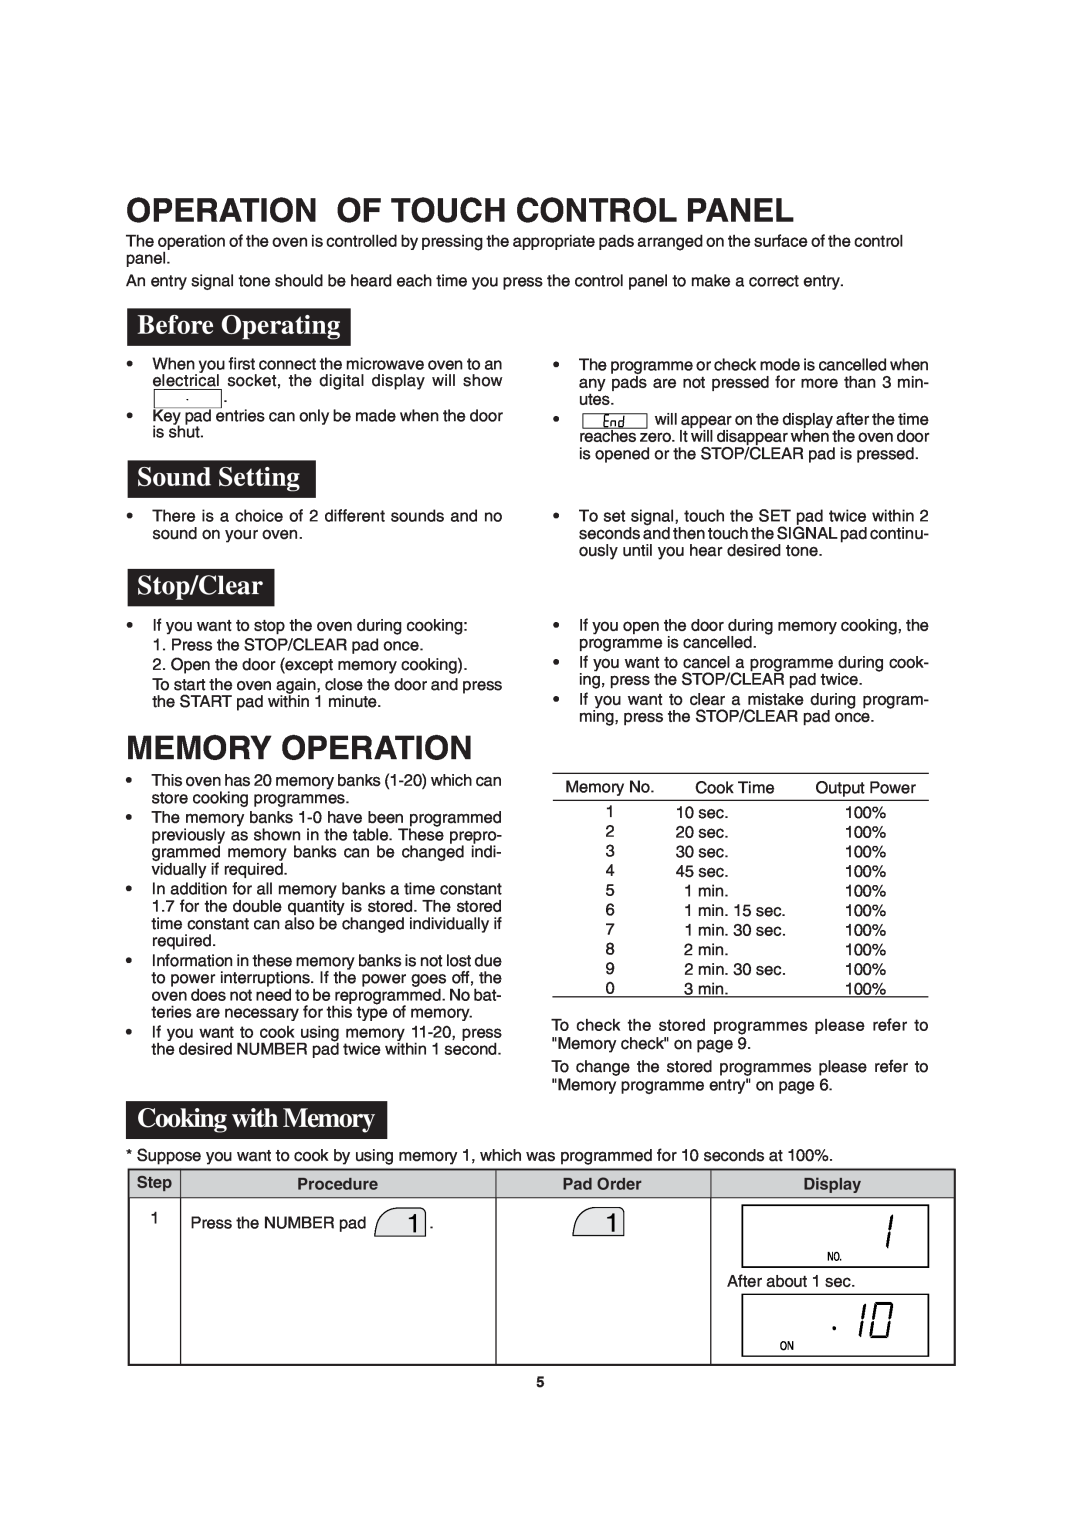 Sharp MODEL R-2197 Operation Of Touch Control Panel, Memory Operation, Before Operating, Sound Setting, Stop/Clear 